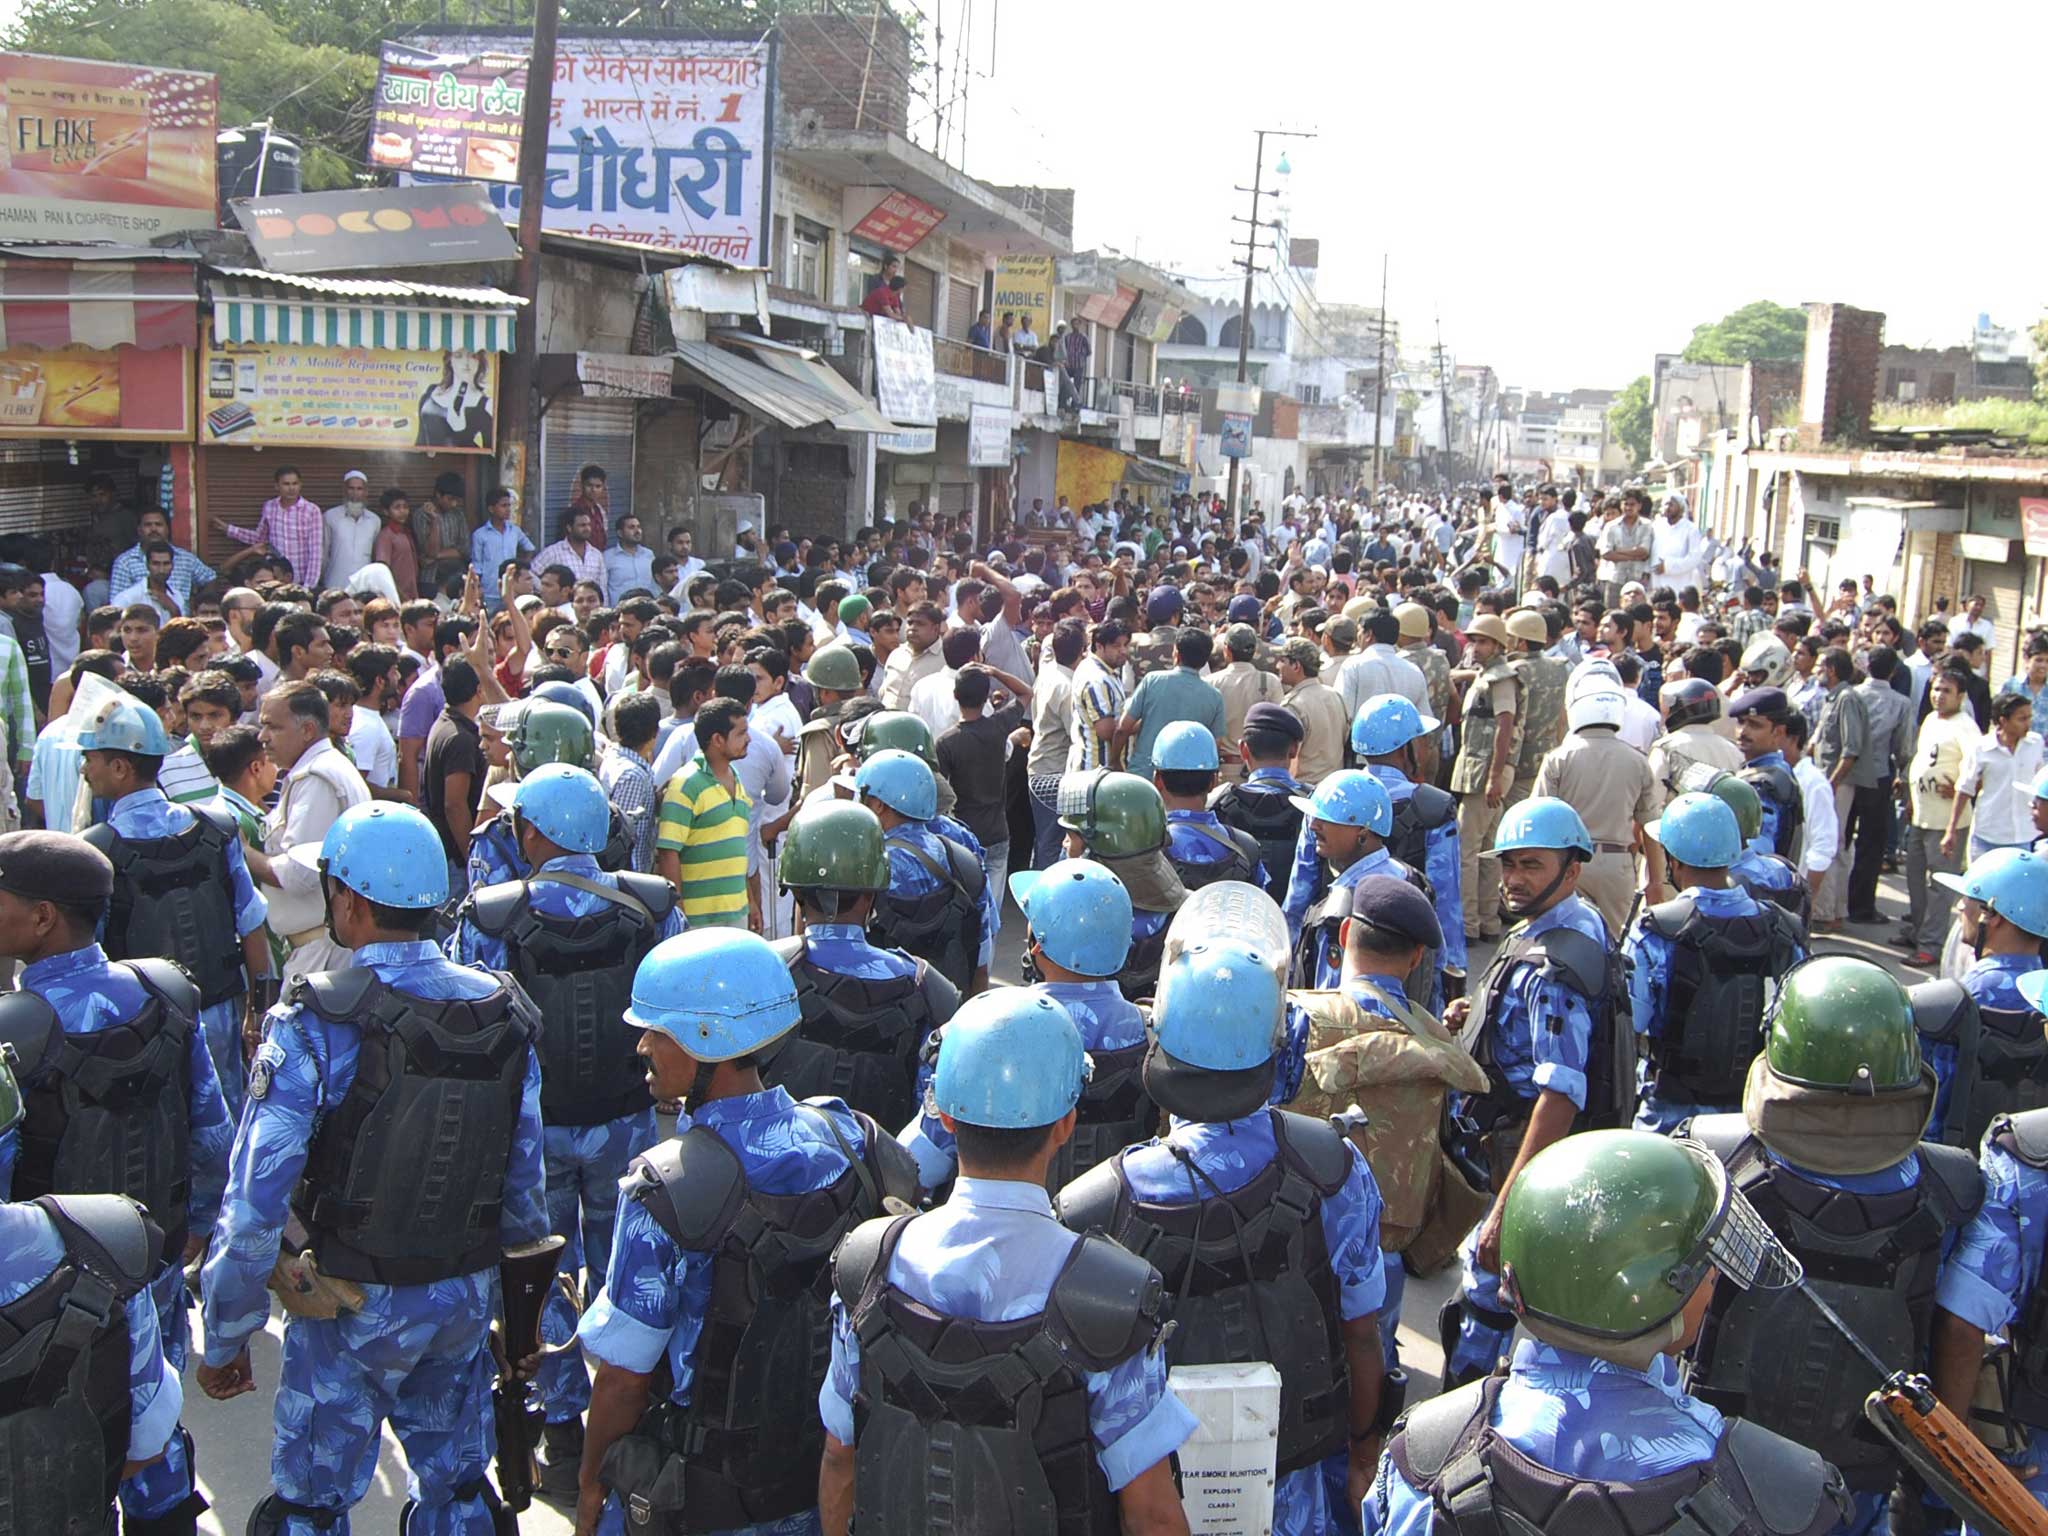 Indian security forces at the scene of clashes in Muzaffarnagar